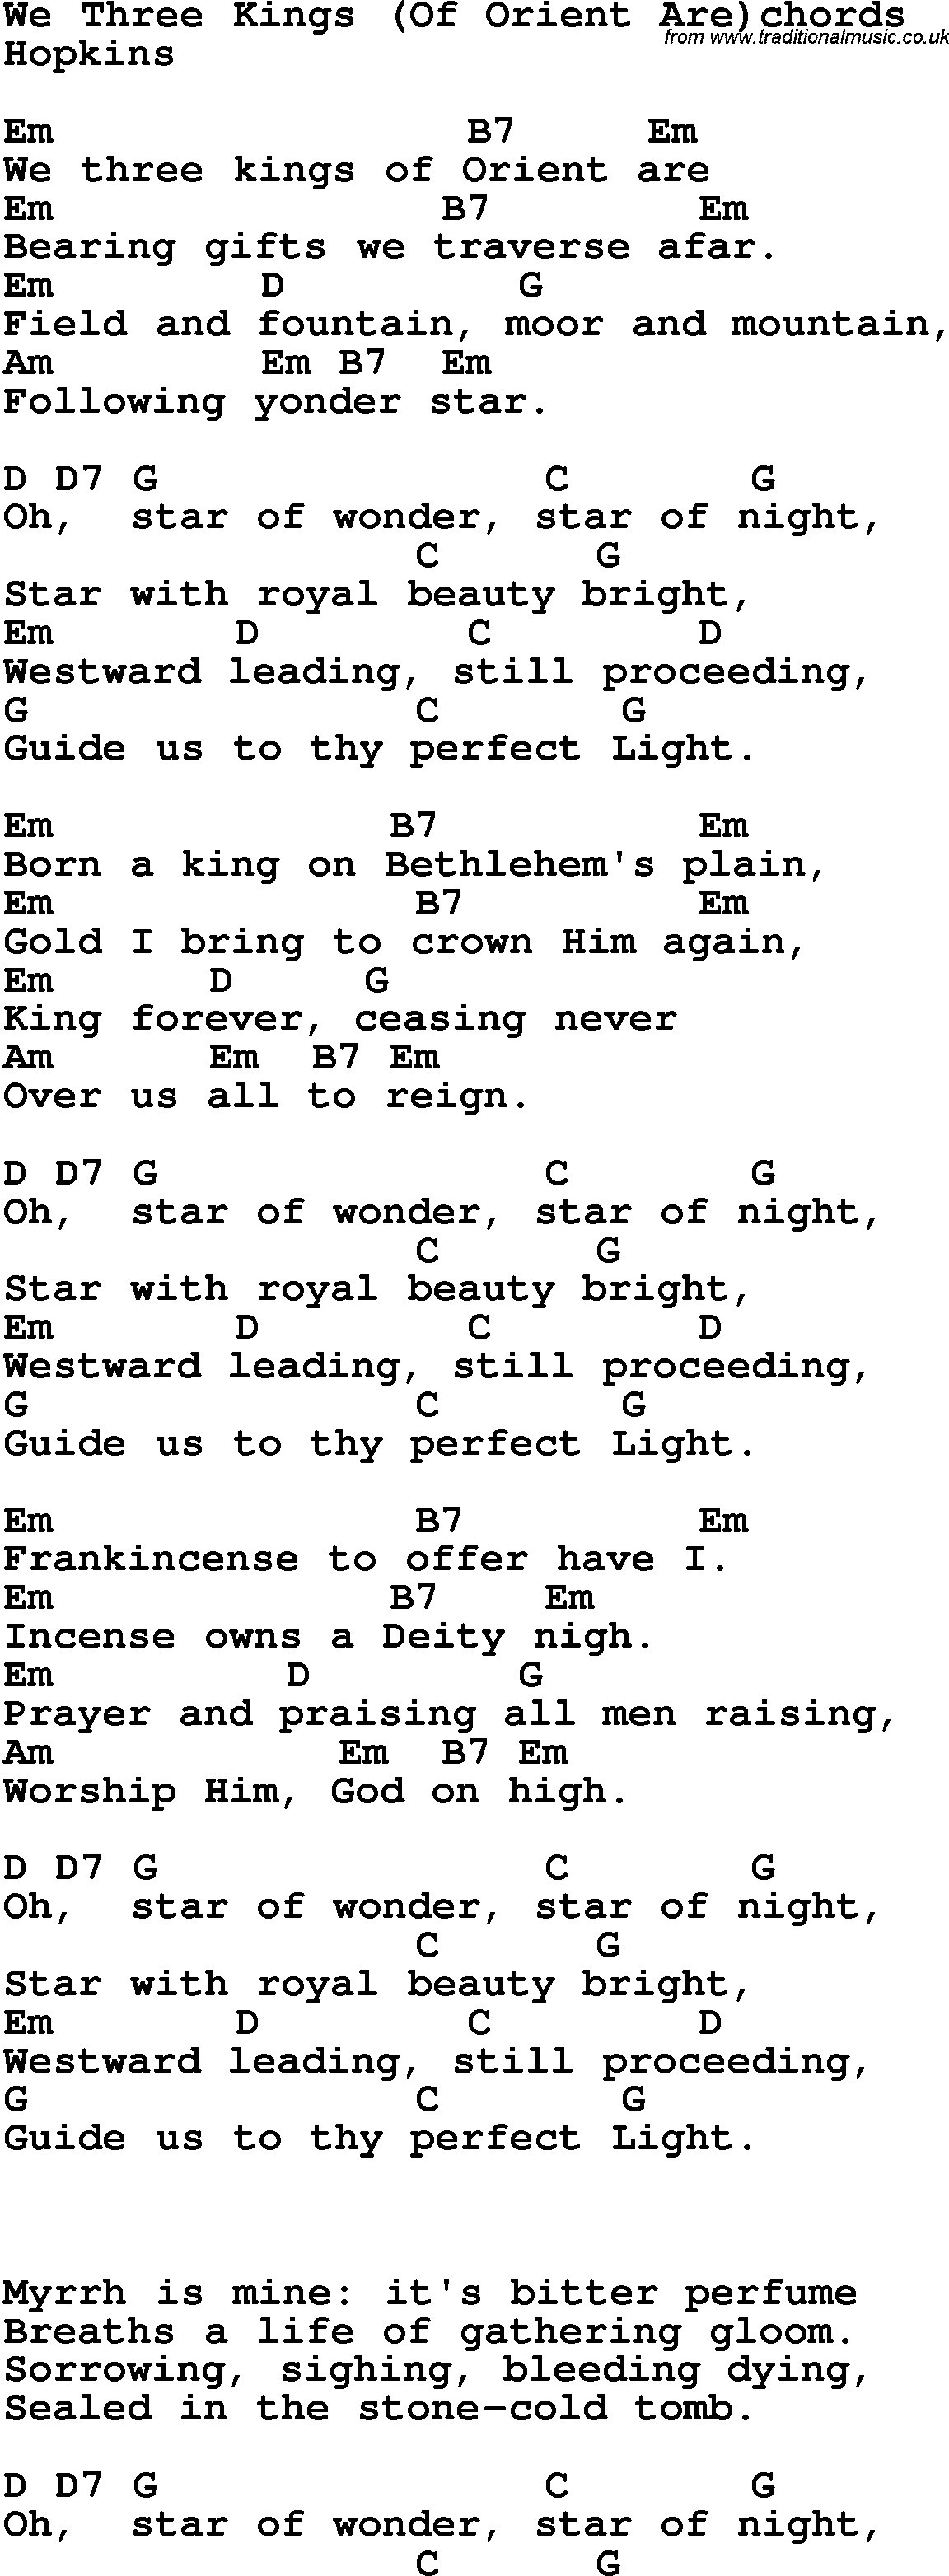 Song Lyrics with guitar chords for We Three Kings